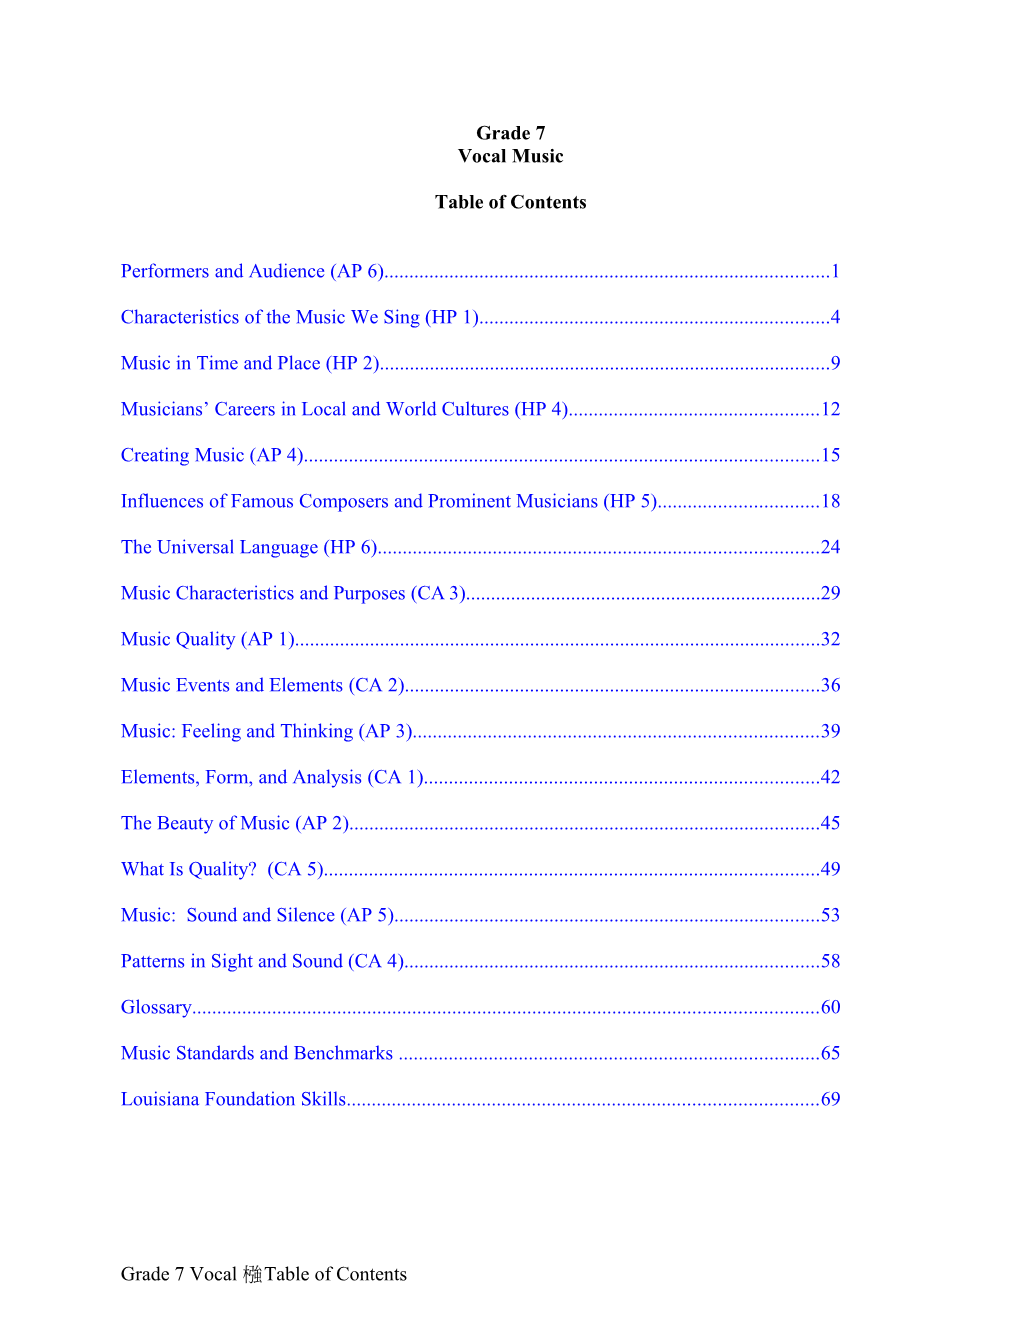 Table of Contents s650